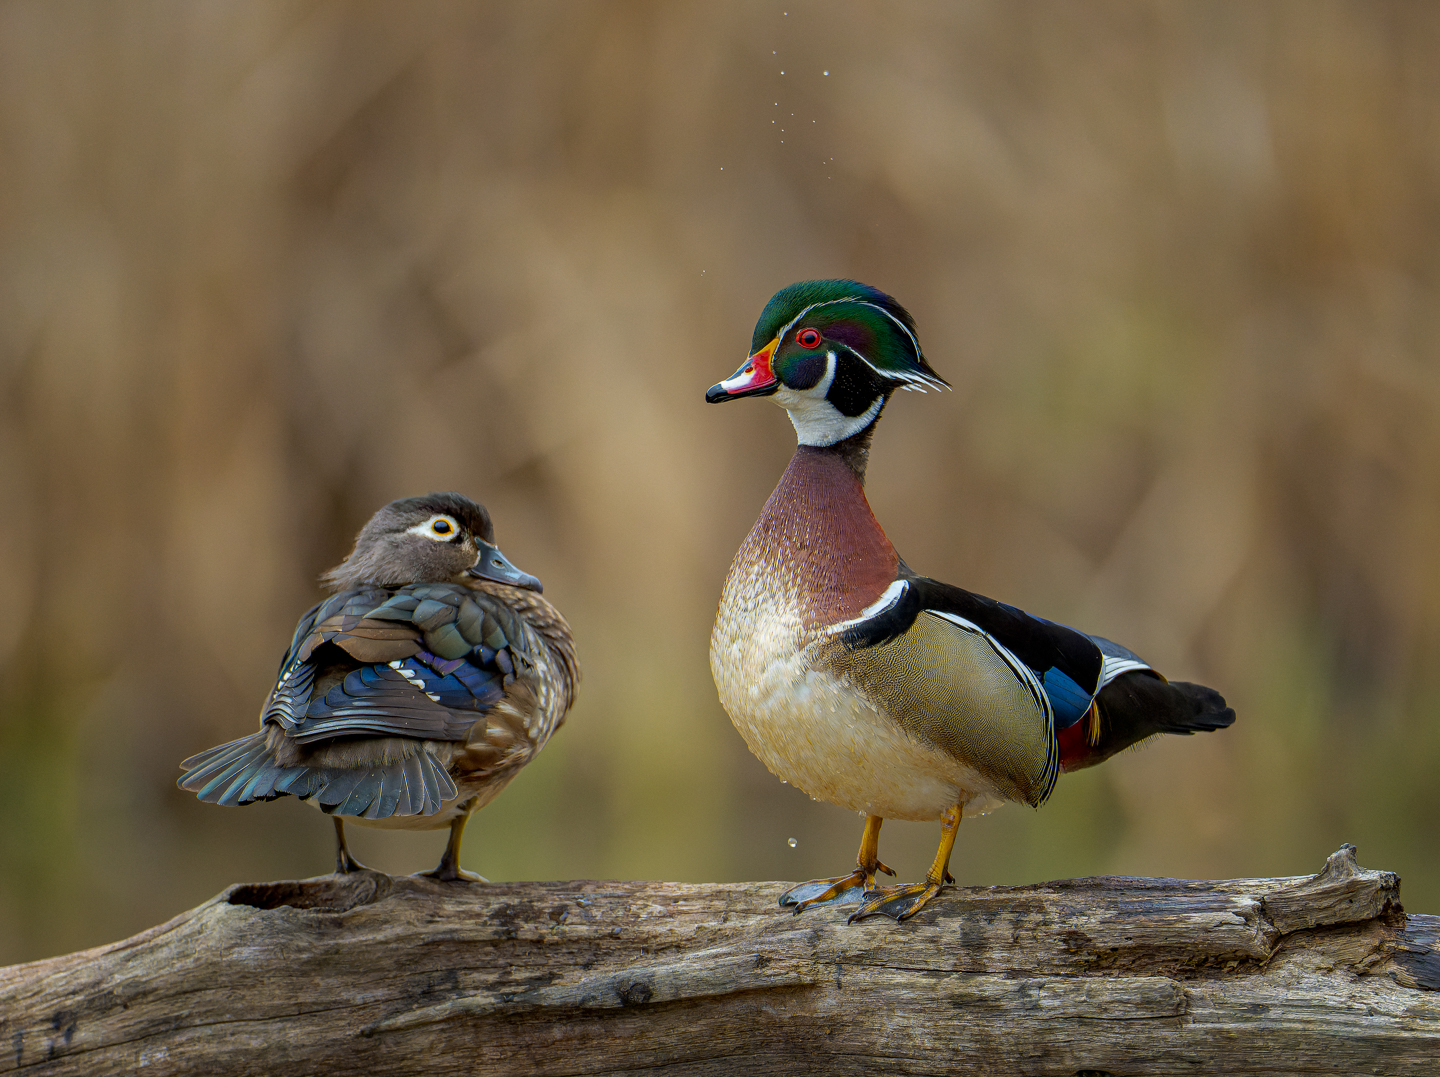 3rd PrizeOpen Color In Class 3 By Robin Harrison For Courting Wood Ducks APR-2022.jpg